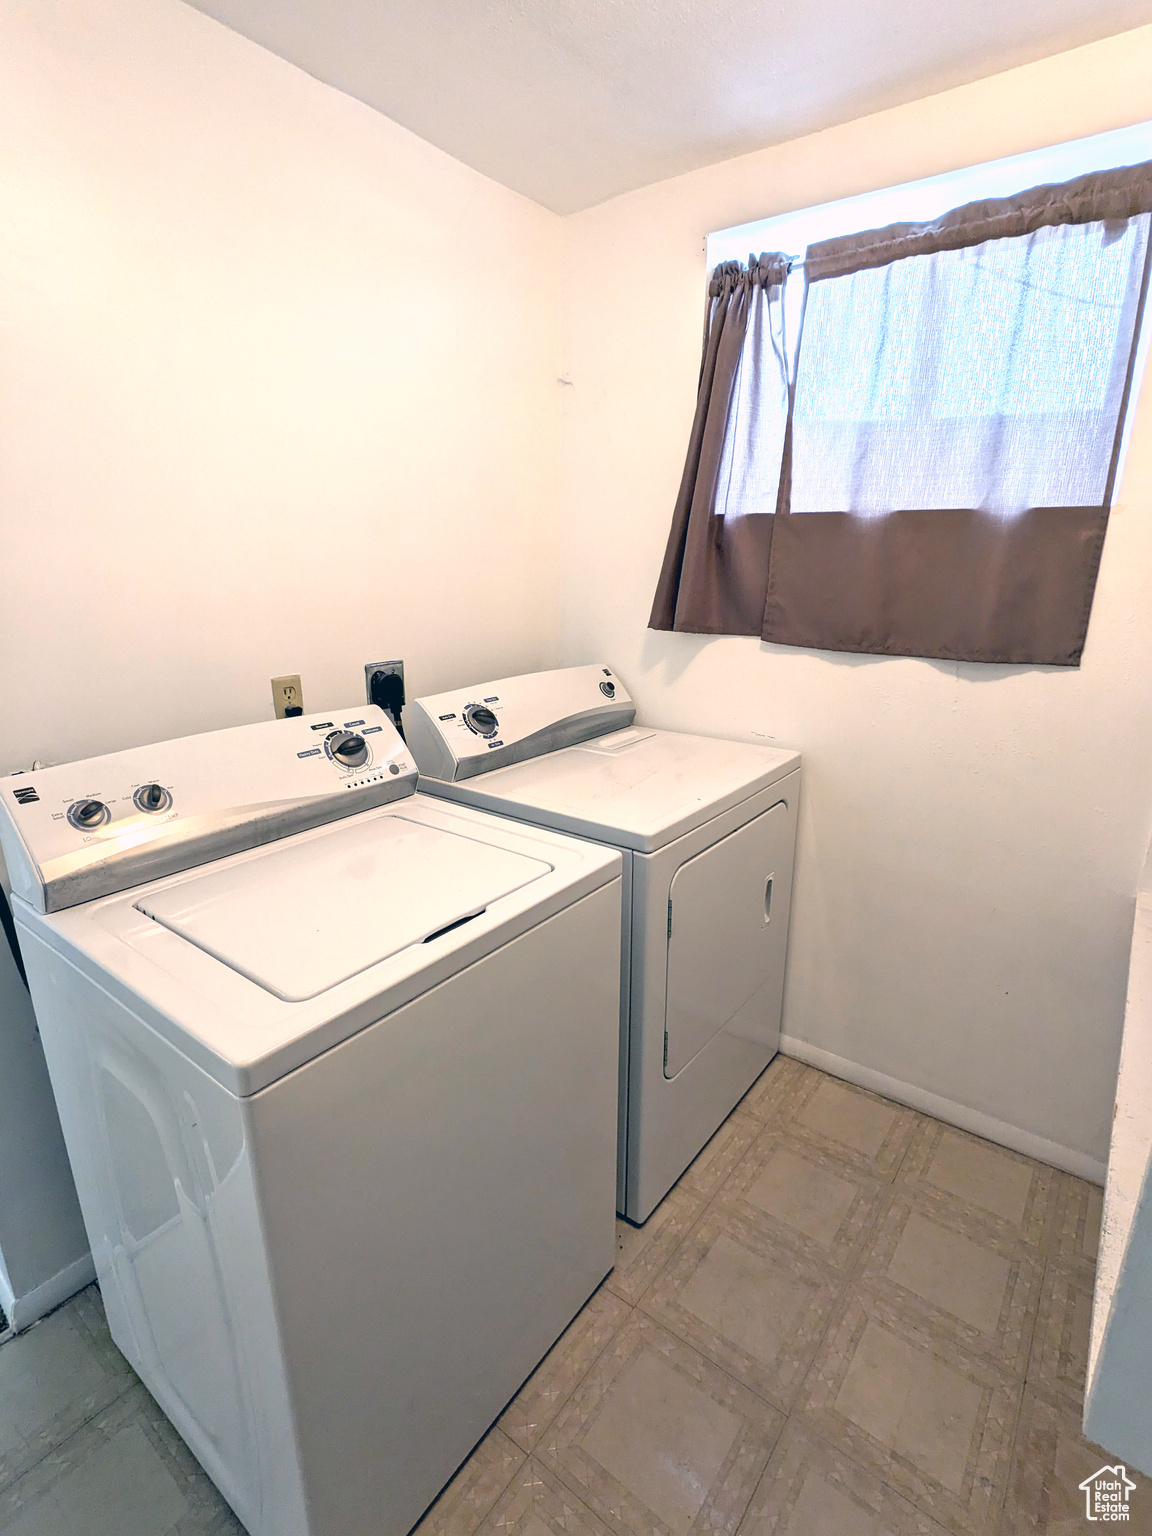 Washroom featuring independent washer and dryer, electric dryer hookup, and tile flooring